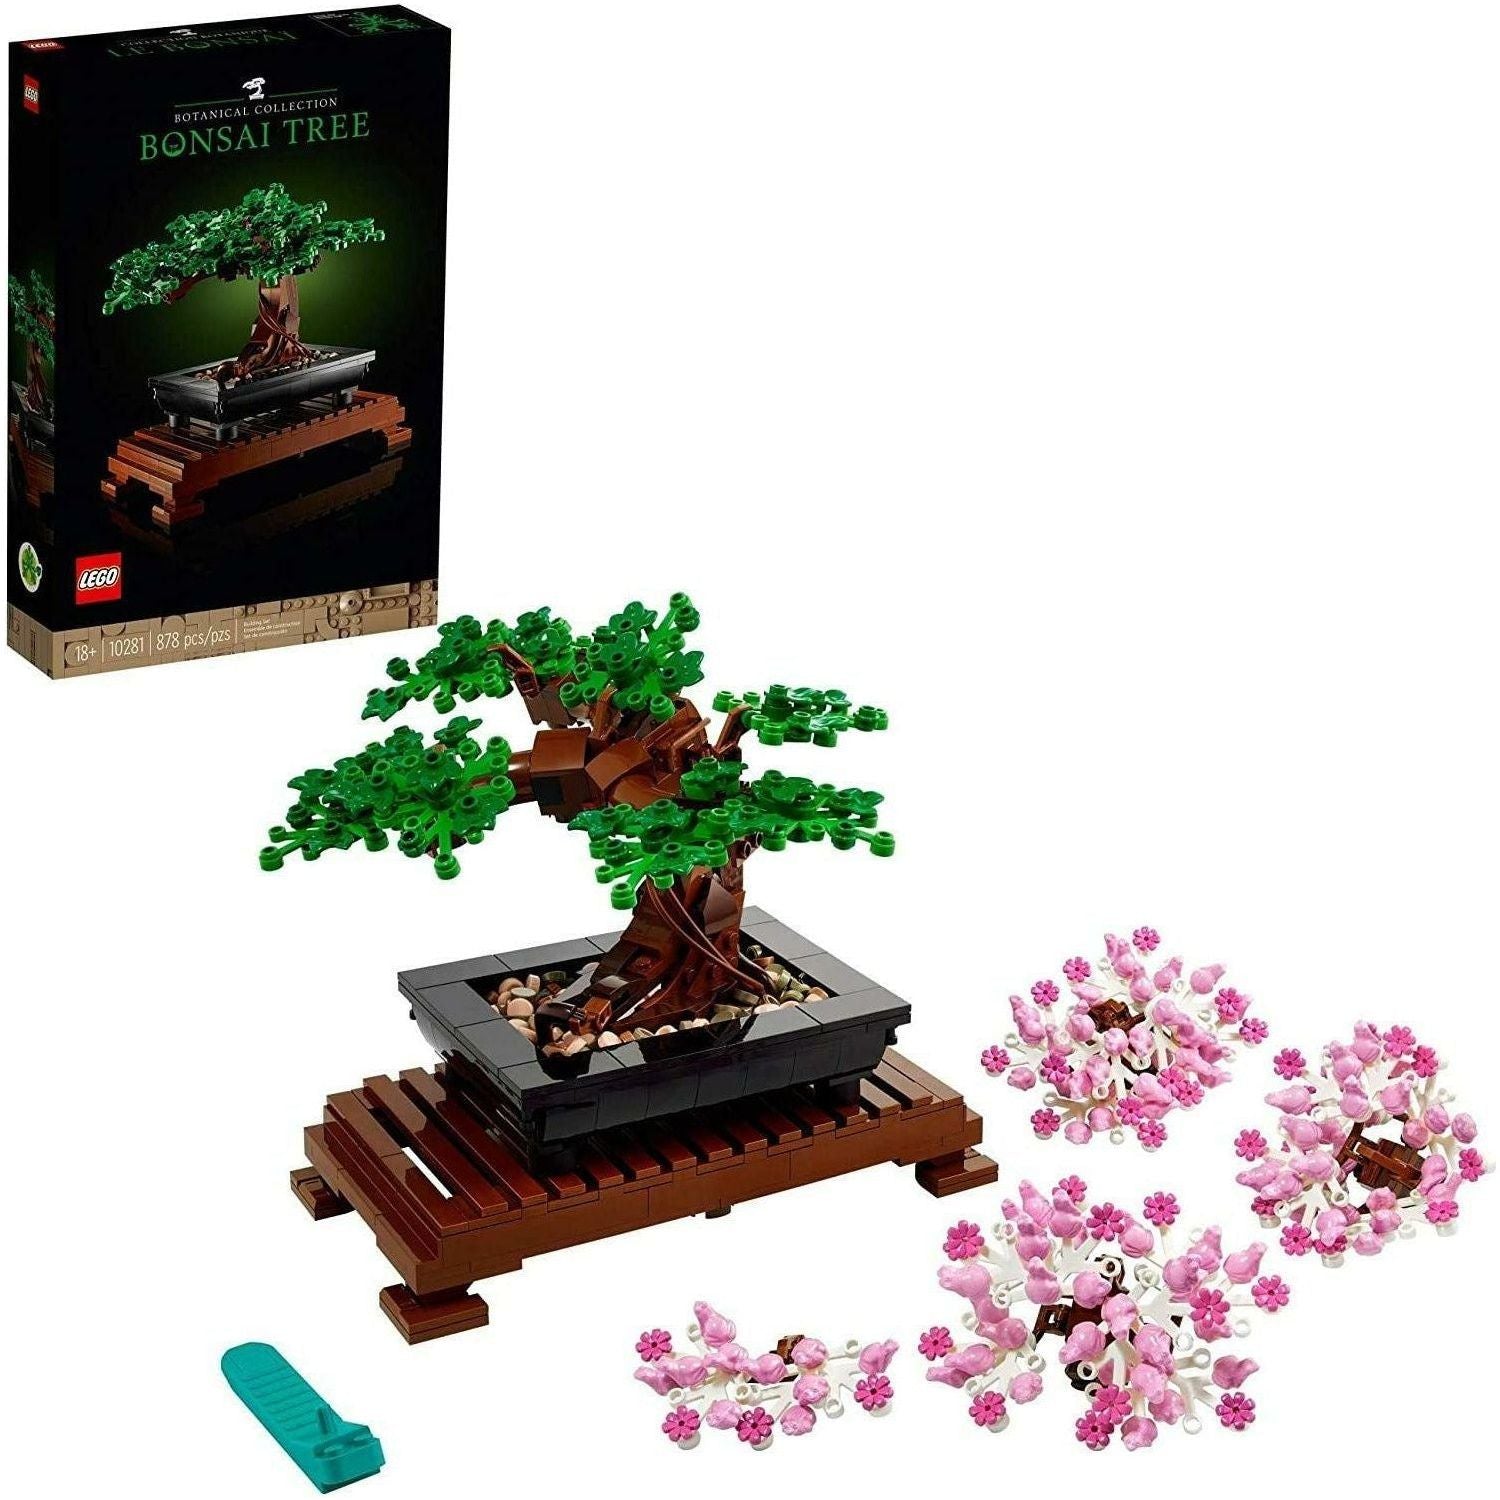 LEGO Icons Bonsai Tree Building Set 10281 - Featuring Cherry Blossom Flowers, DIY Plant Model for Adults, Creative Gift for Home Décor and Office Art, Botanical Collection Design Kit - BumbleToys - 18+, Botanical, Boys, Girls, Icons, LEGO, OXE, Pre-Order